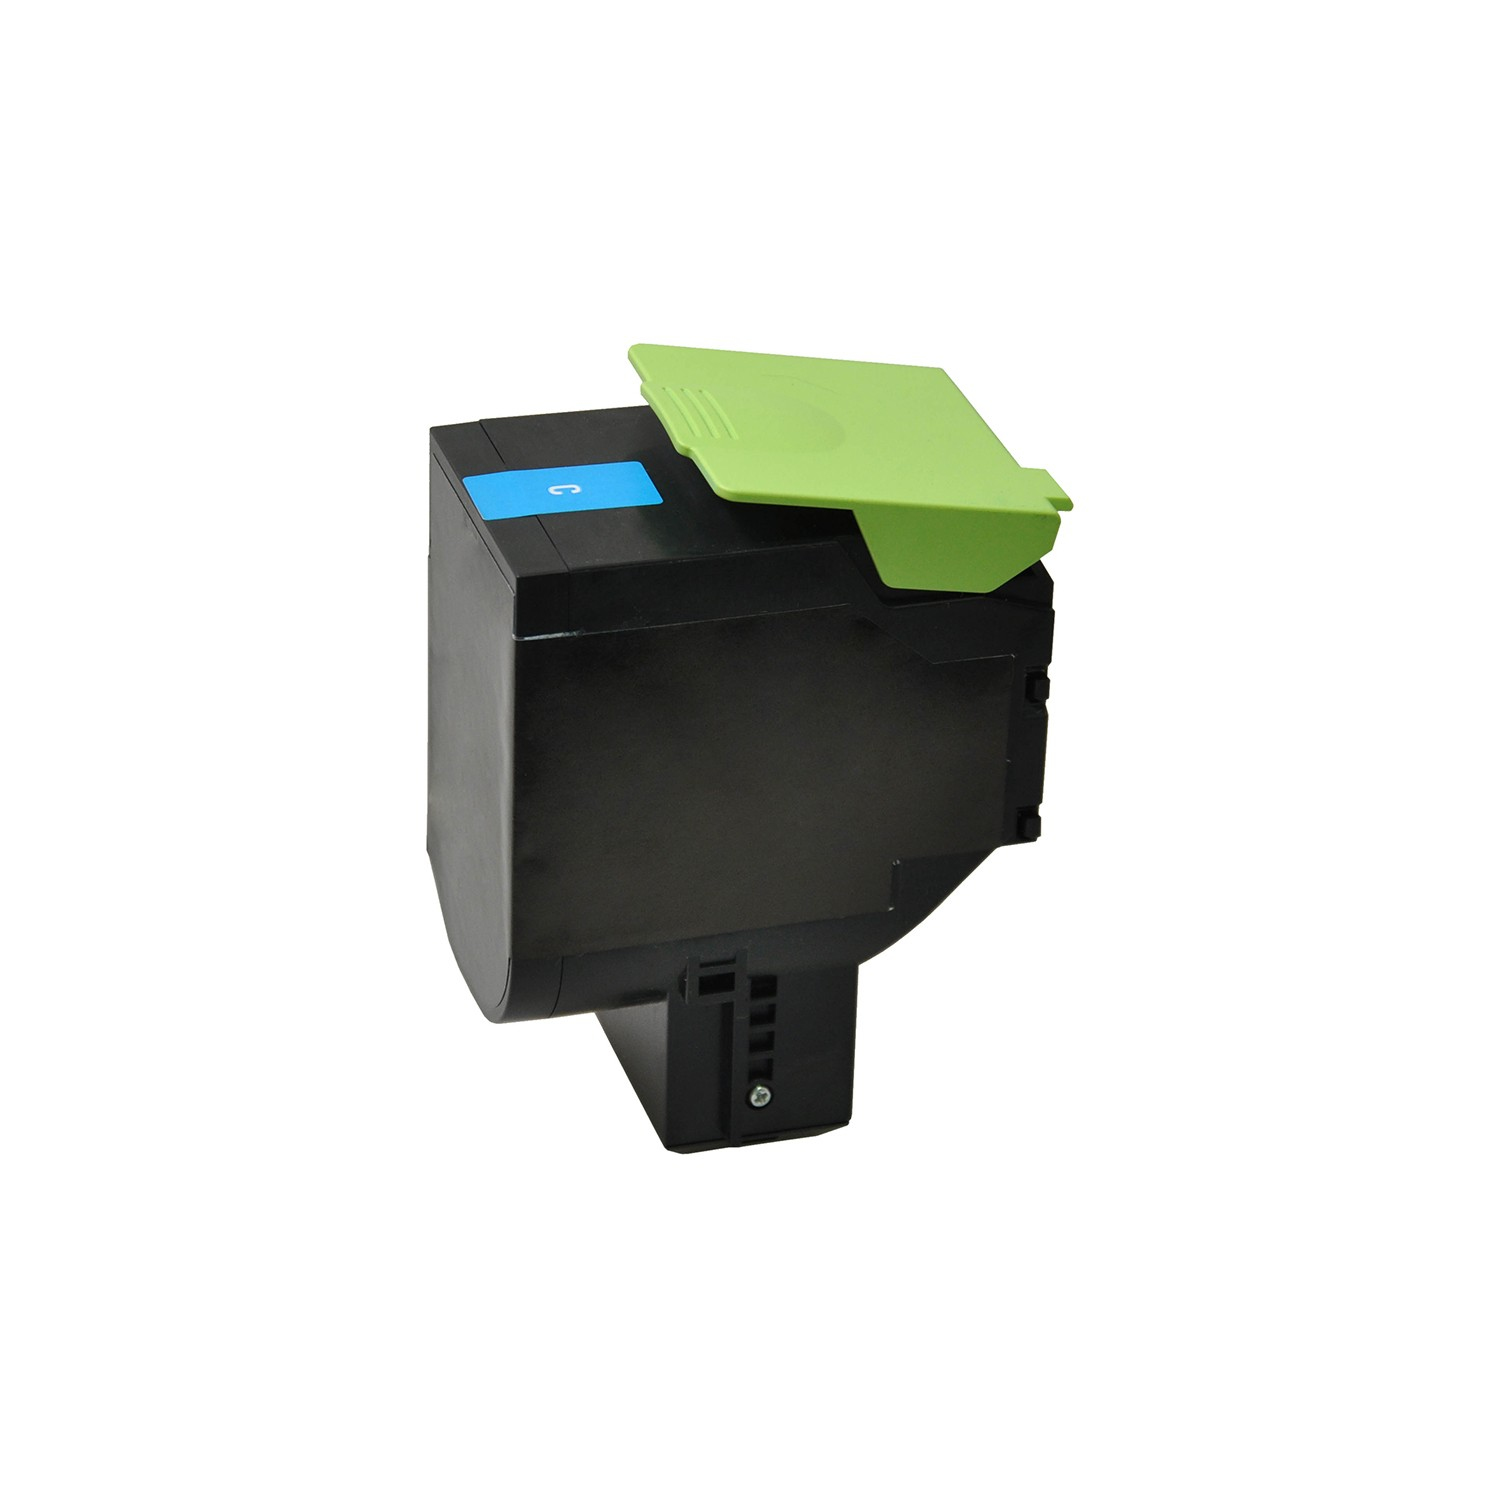 V7 Toner for selected Lexmark printers - Replacement for OEM cartridge part number 80C2HC0